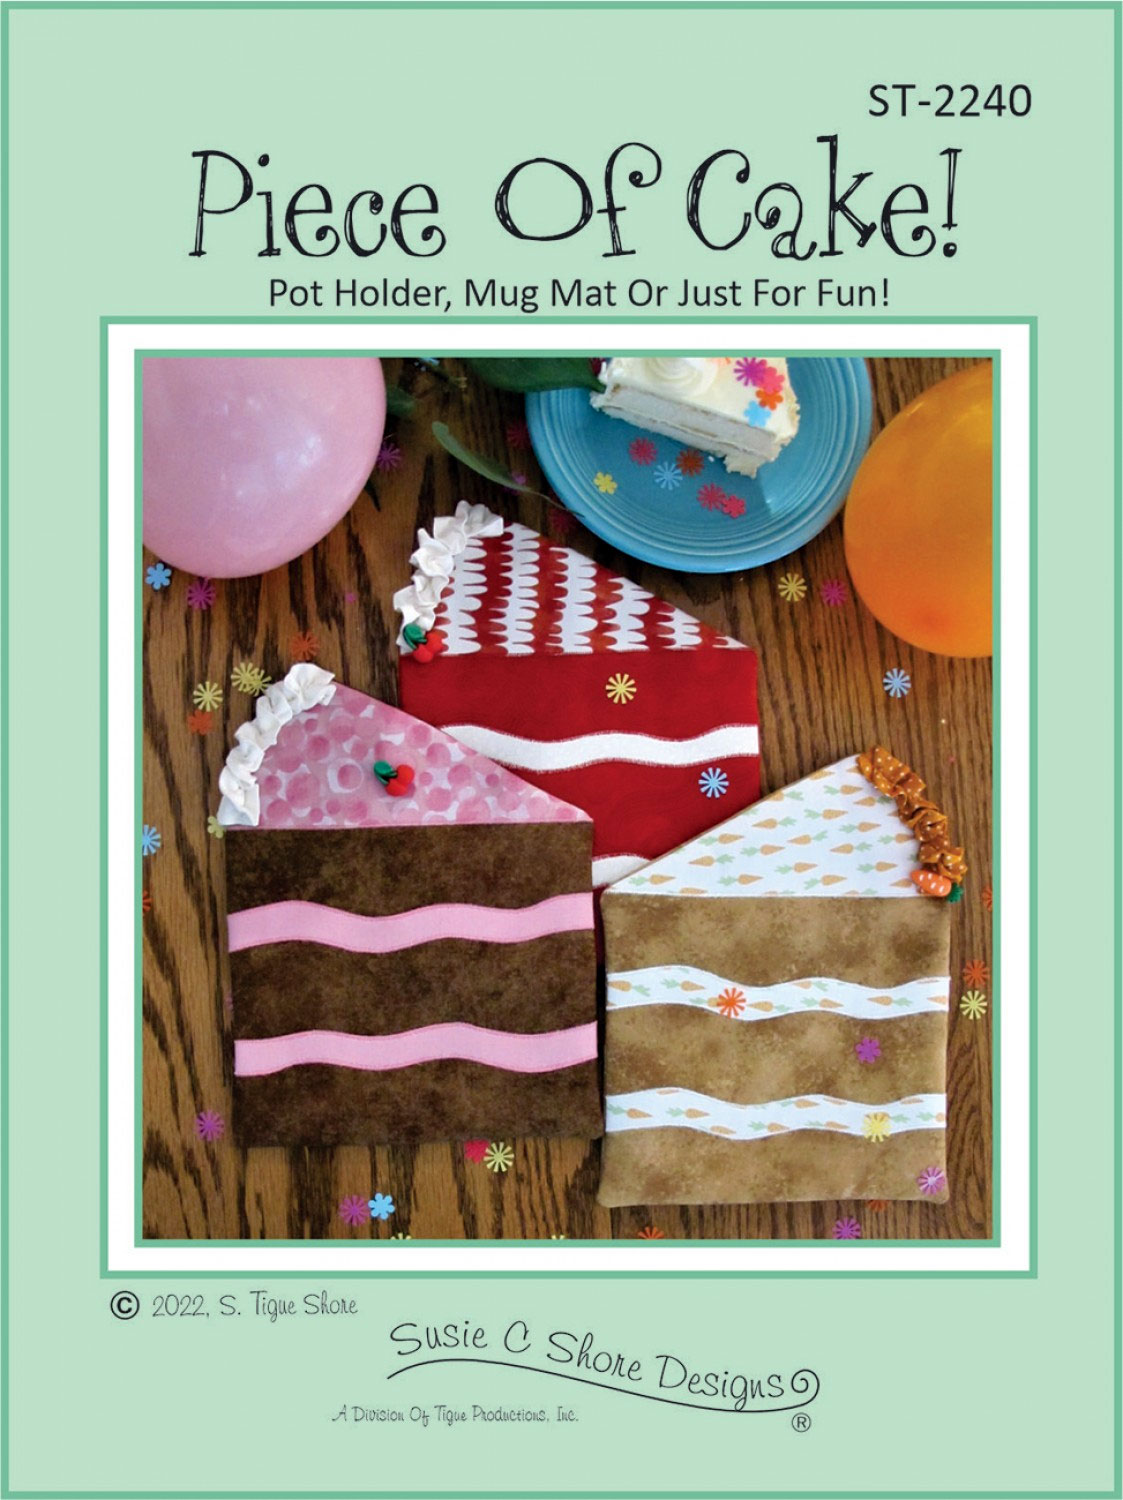 Piece-of-Cake-sewing-pattern-Susie-C-Shore-front